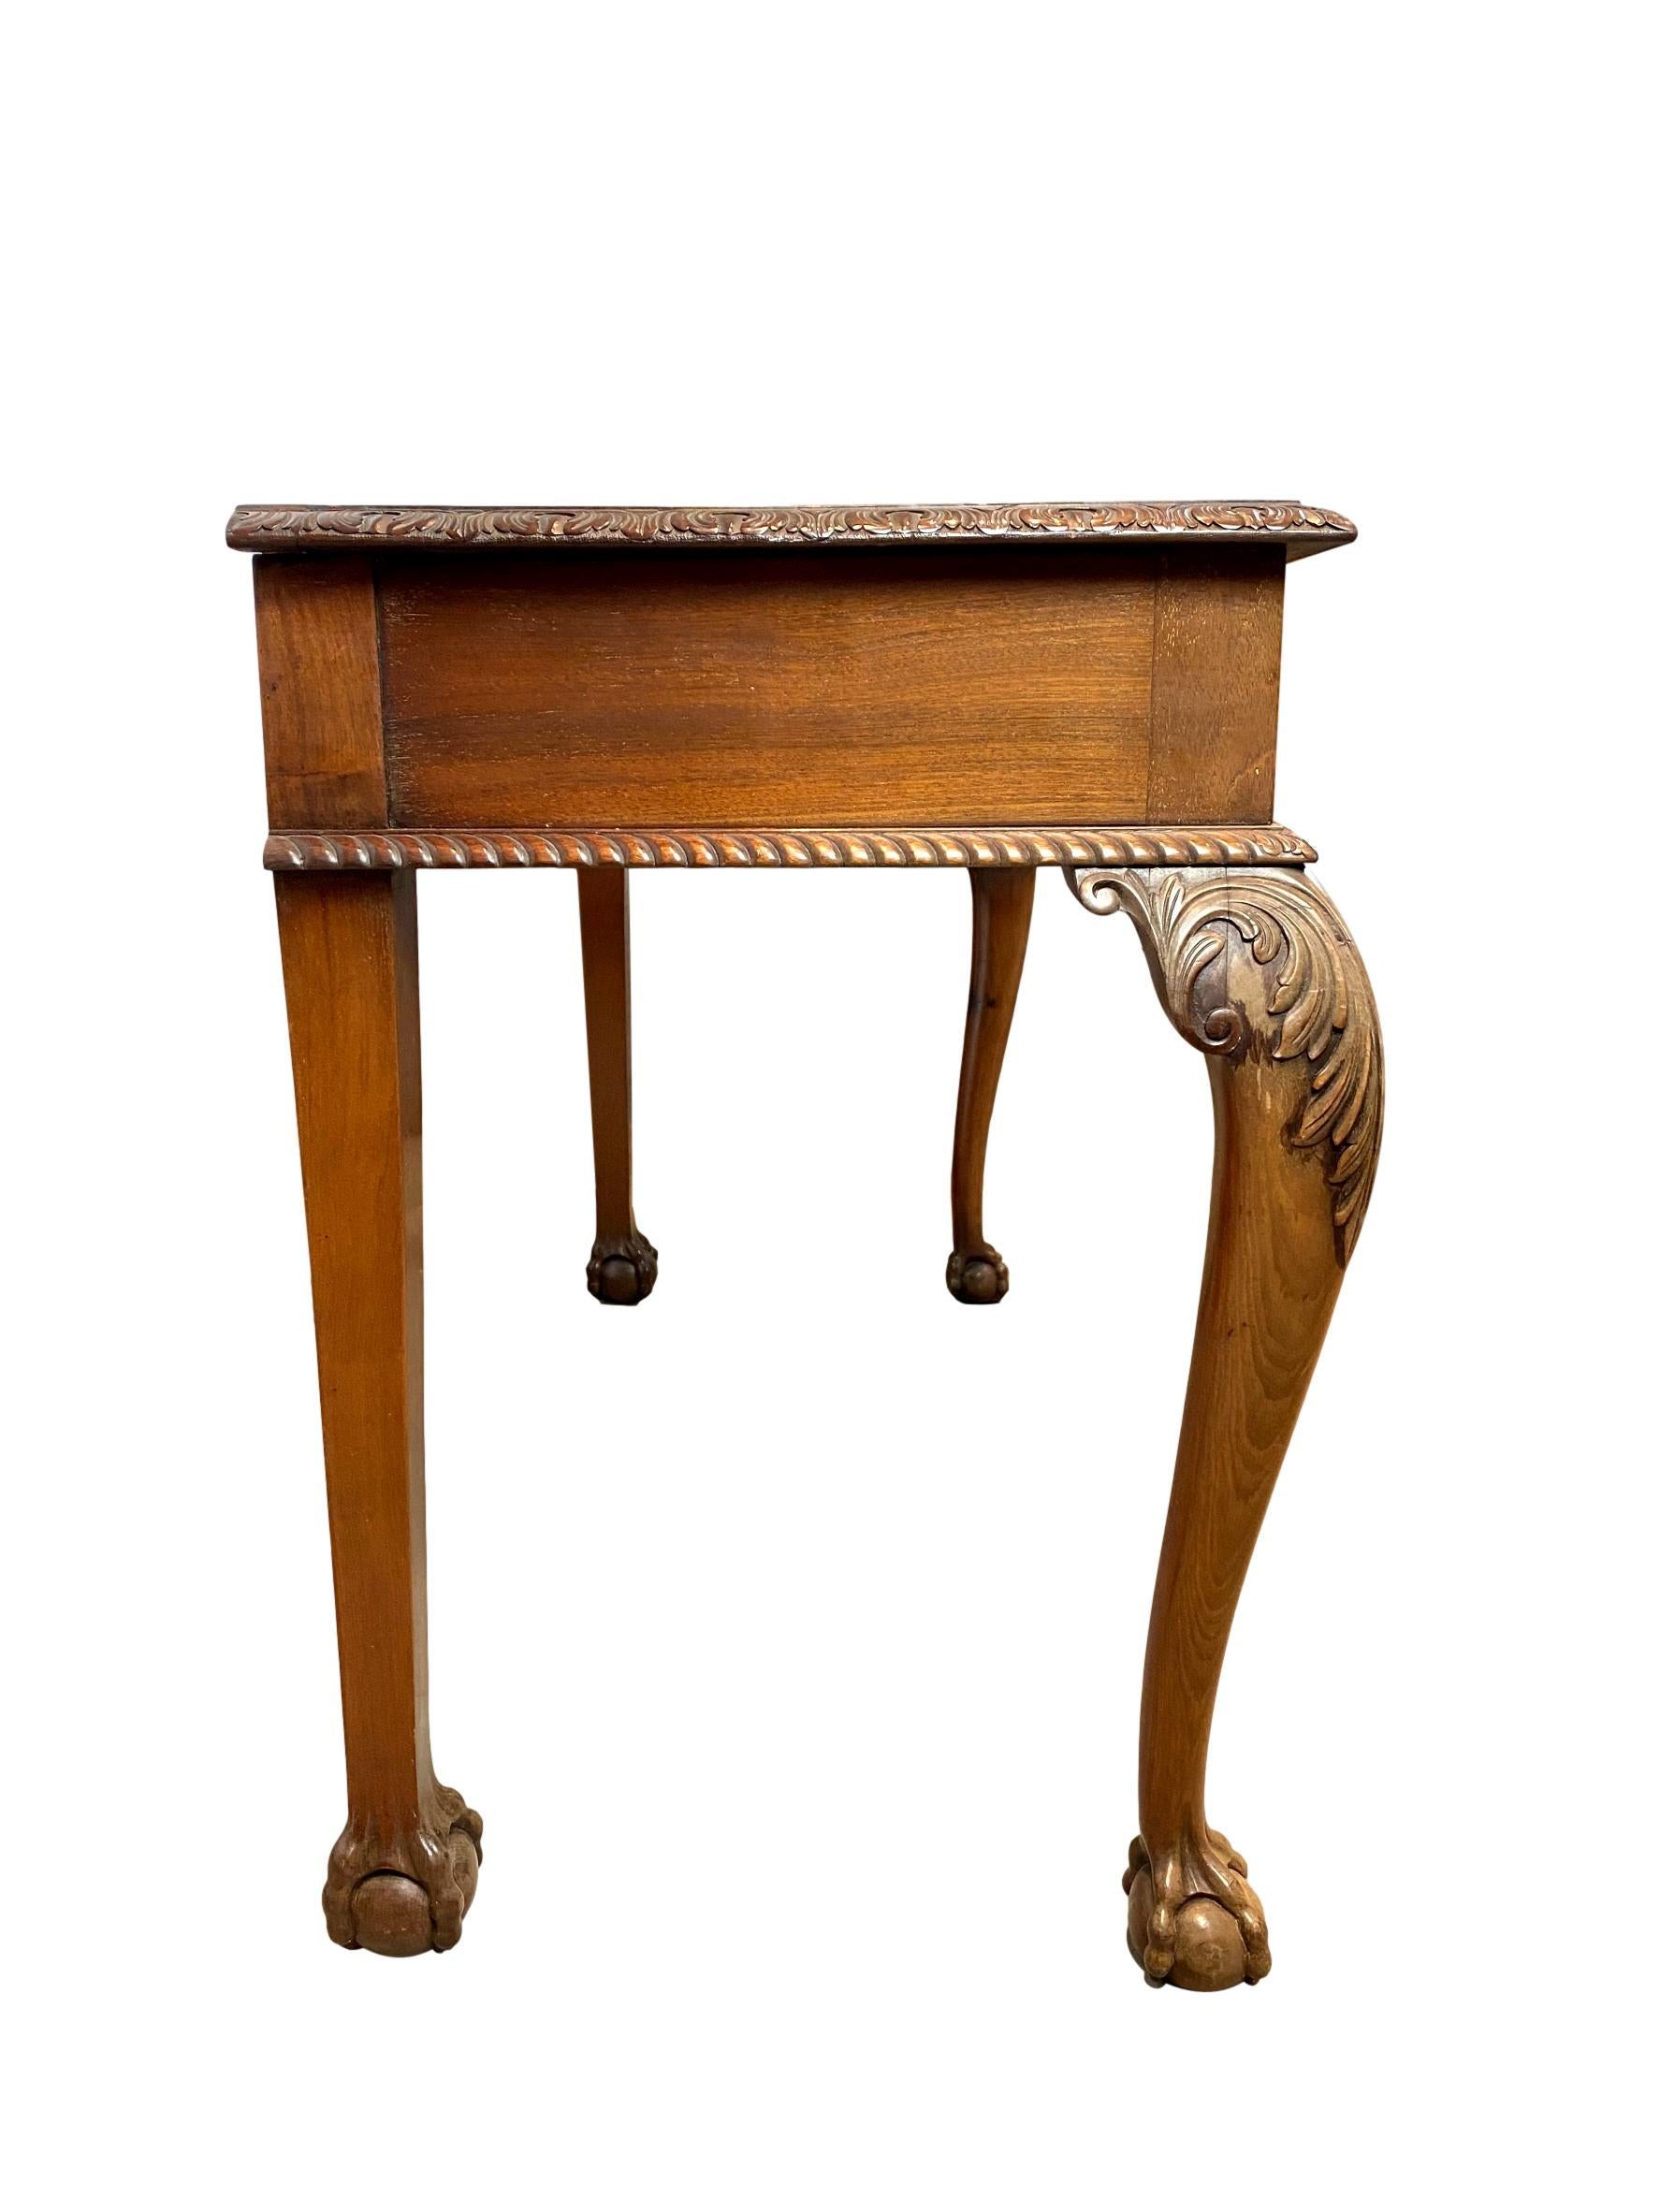 Chippendale Revival mahogany three-drawer console table, English, circa 1880, of bowed-front form, the top with stylized carved edging, above three drawers, with gadrooned edging below, on ball and claw feet.